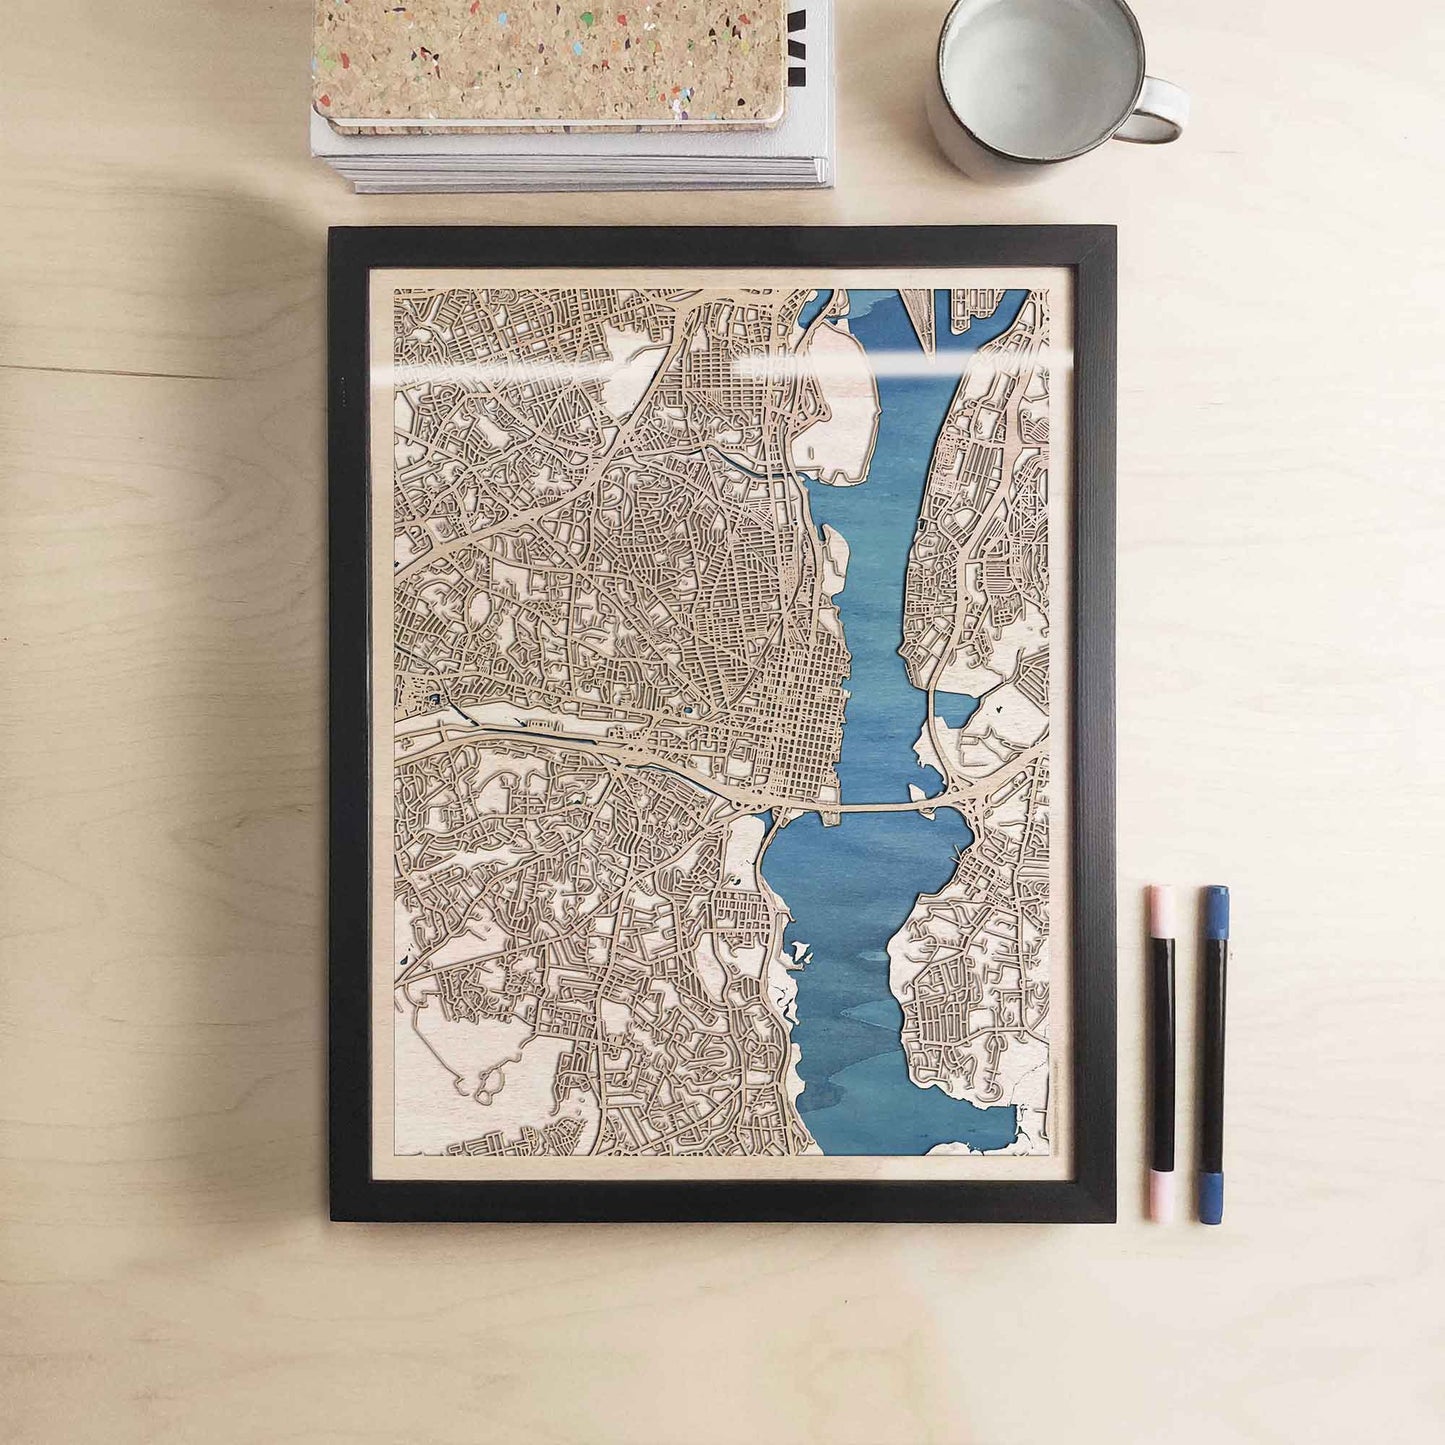 Alexandria Wooden Map by CityWood - Custom Wood Map Art - Unique Laser Cut Engraved - Anniversary Gift